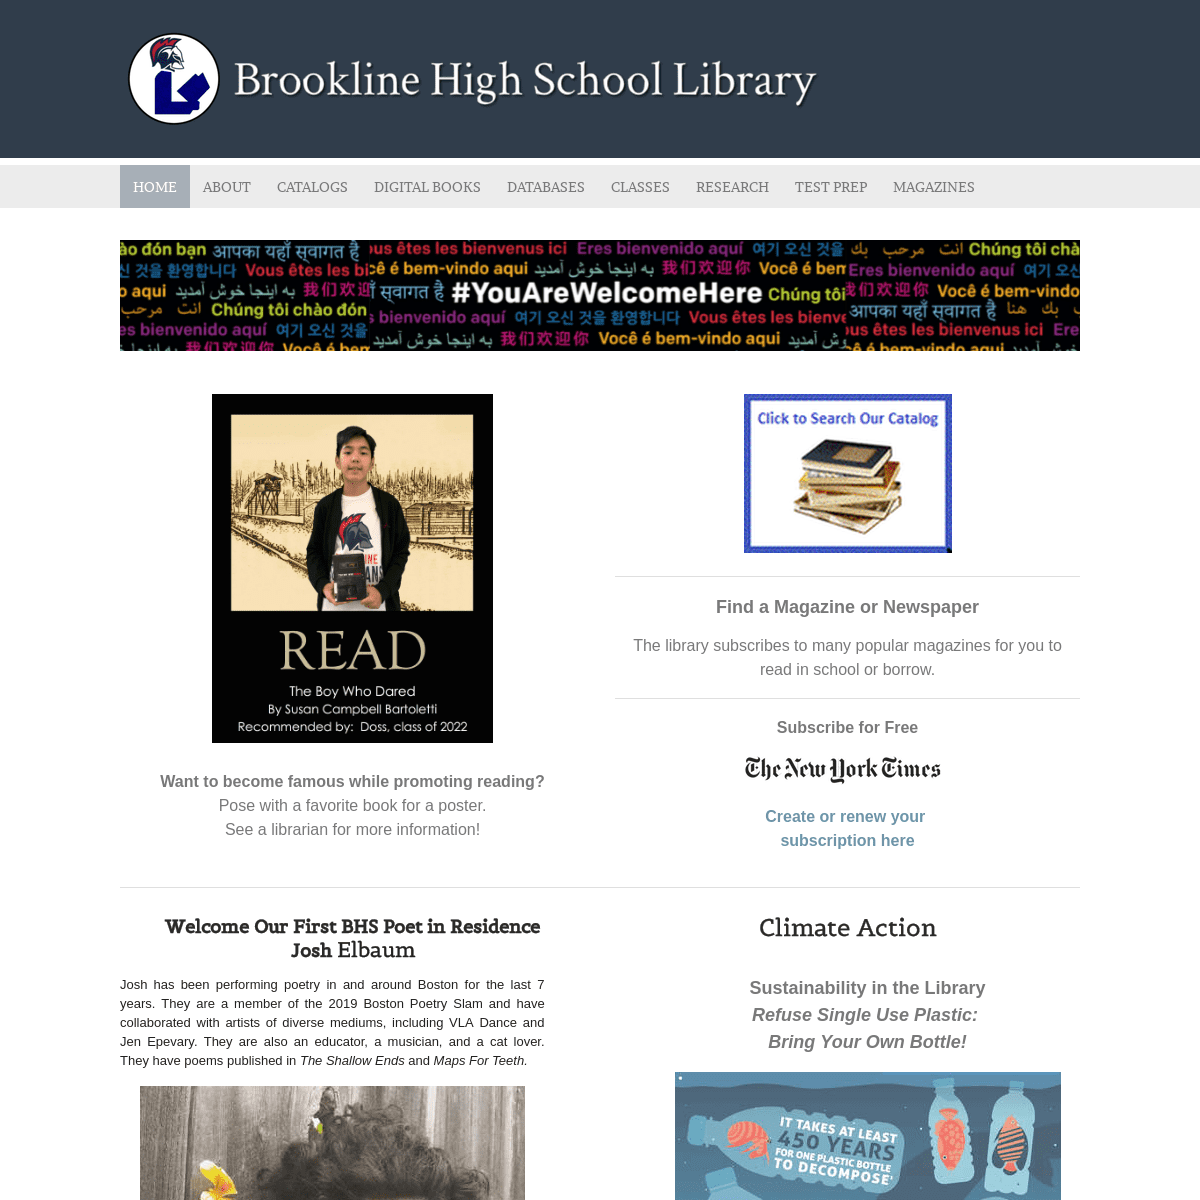 A complete backup of bhslibrary.weebly.com